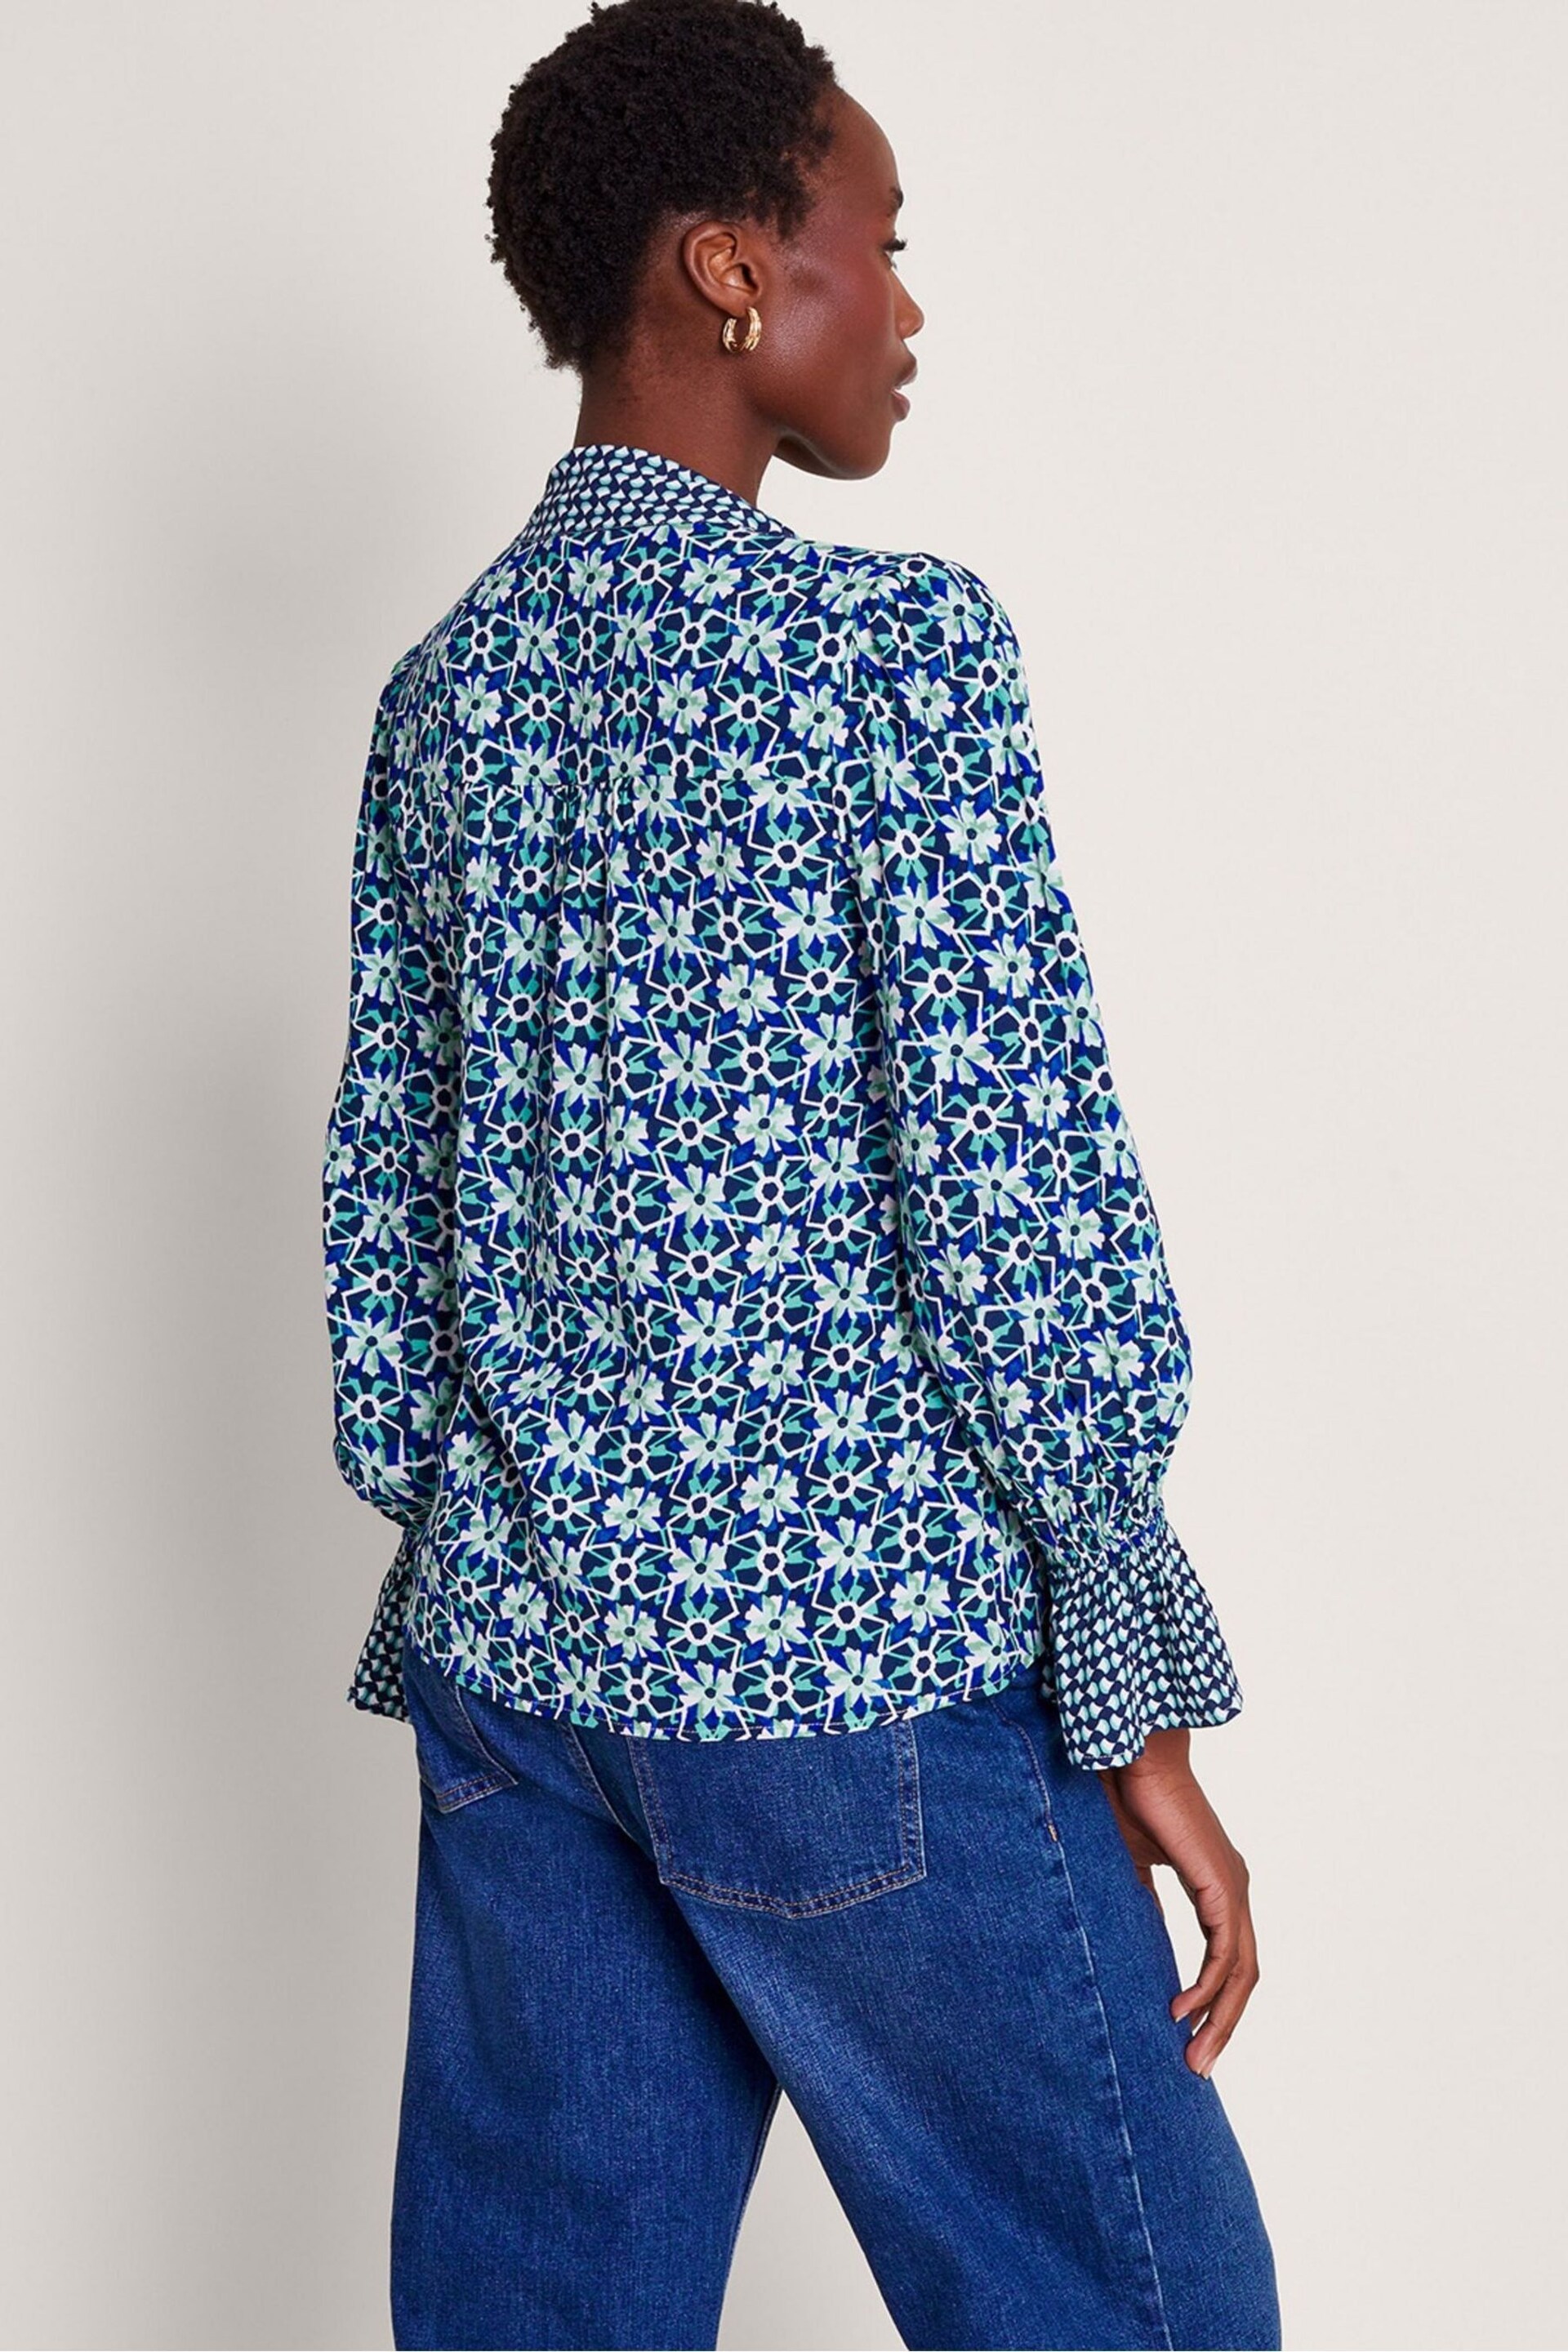 Monsoon Blue Clover Print Pussybow Blouse - Image 4 of 5